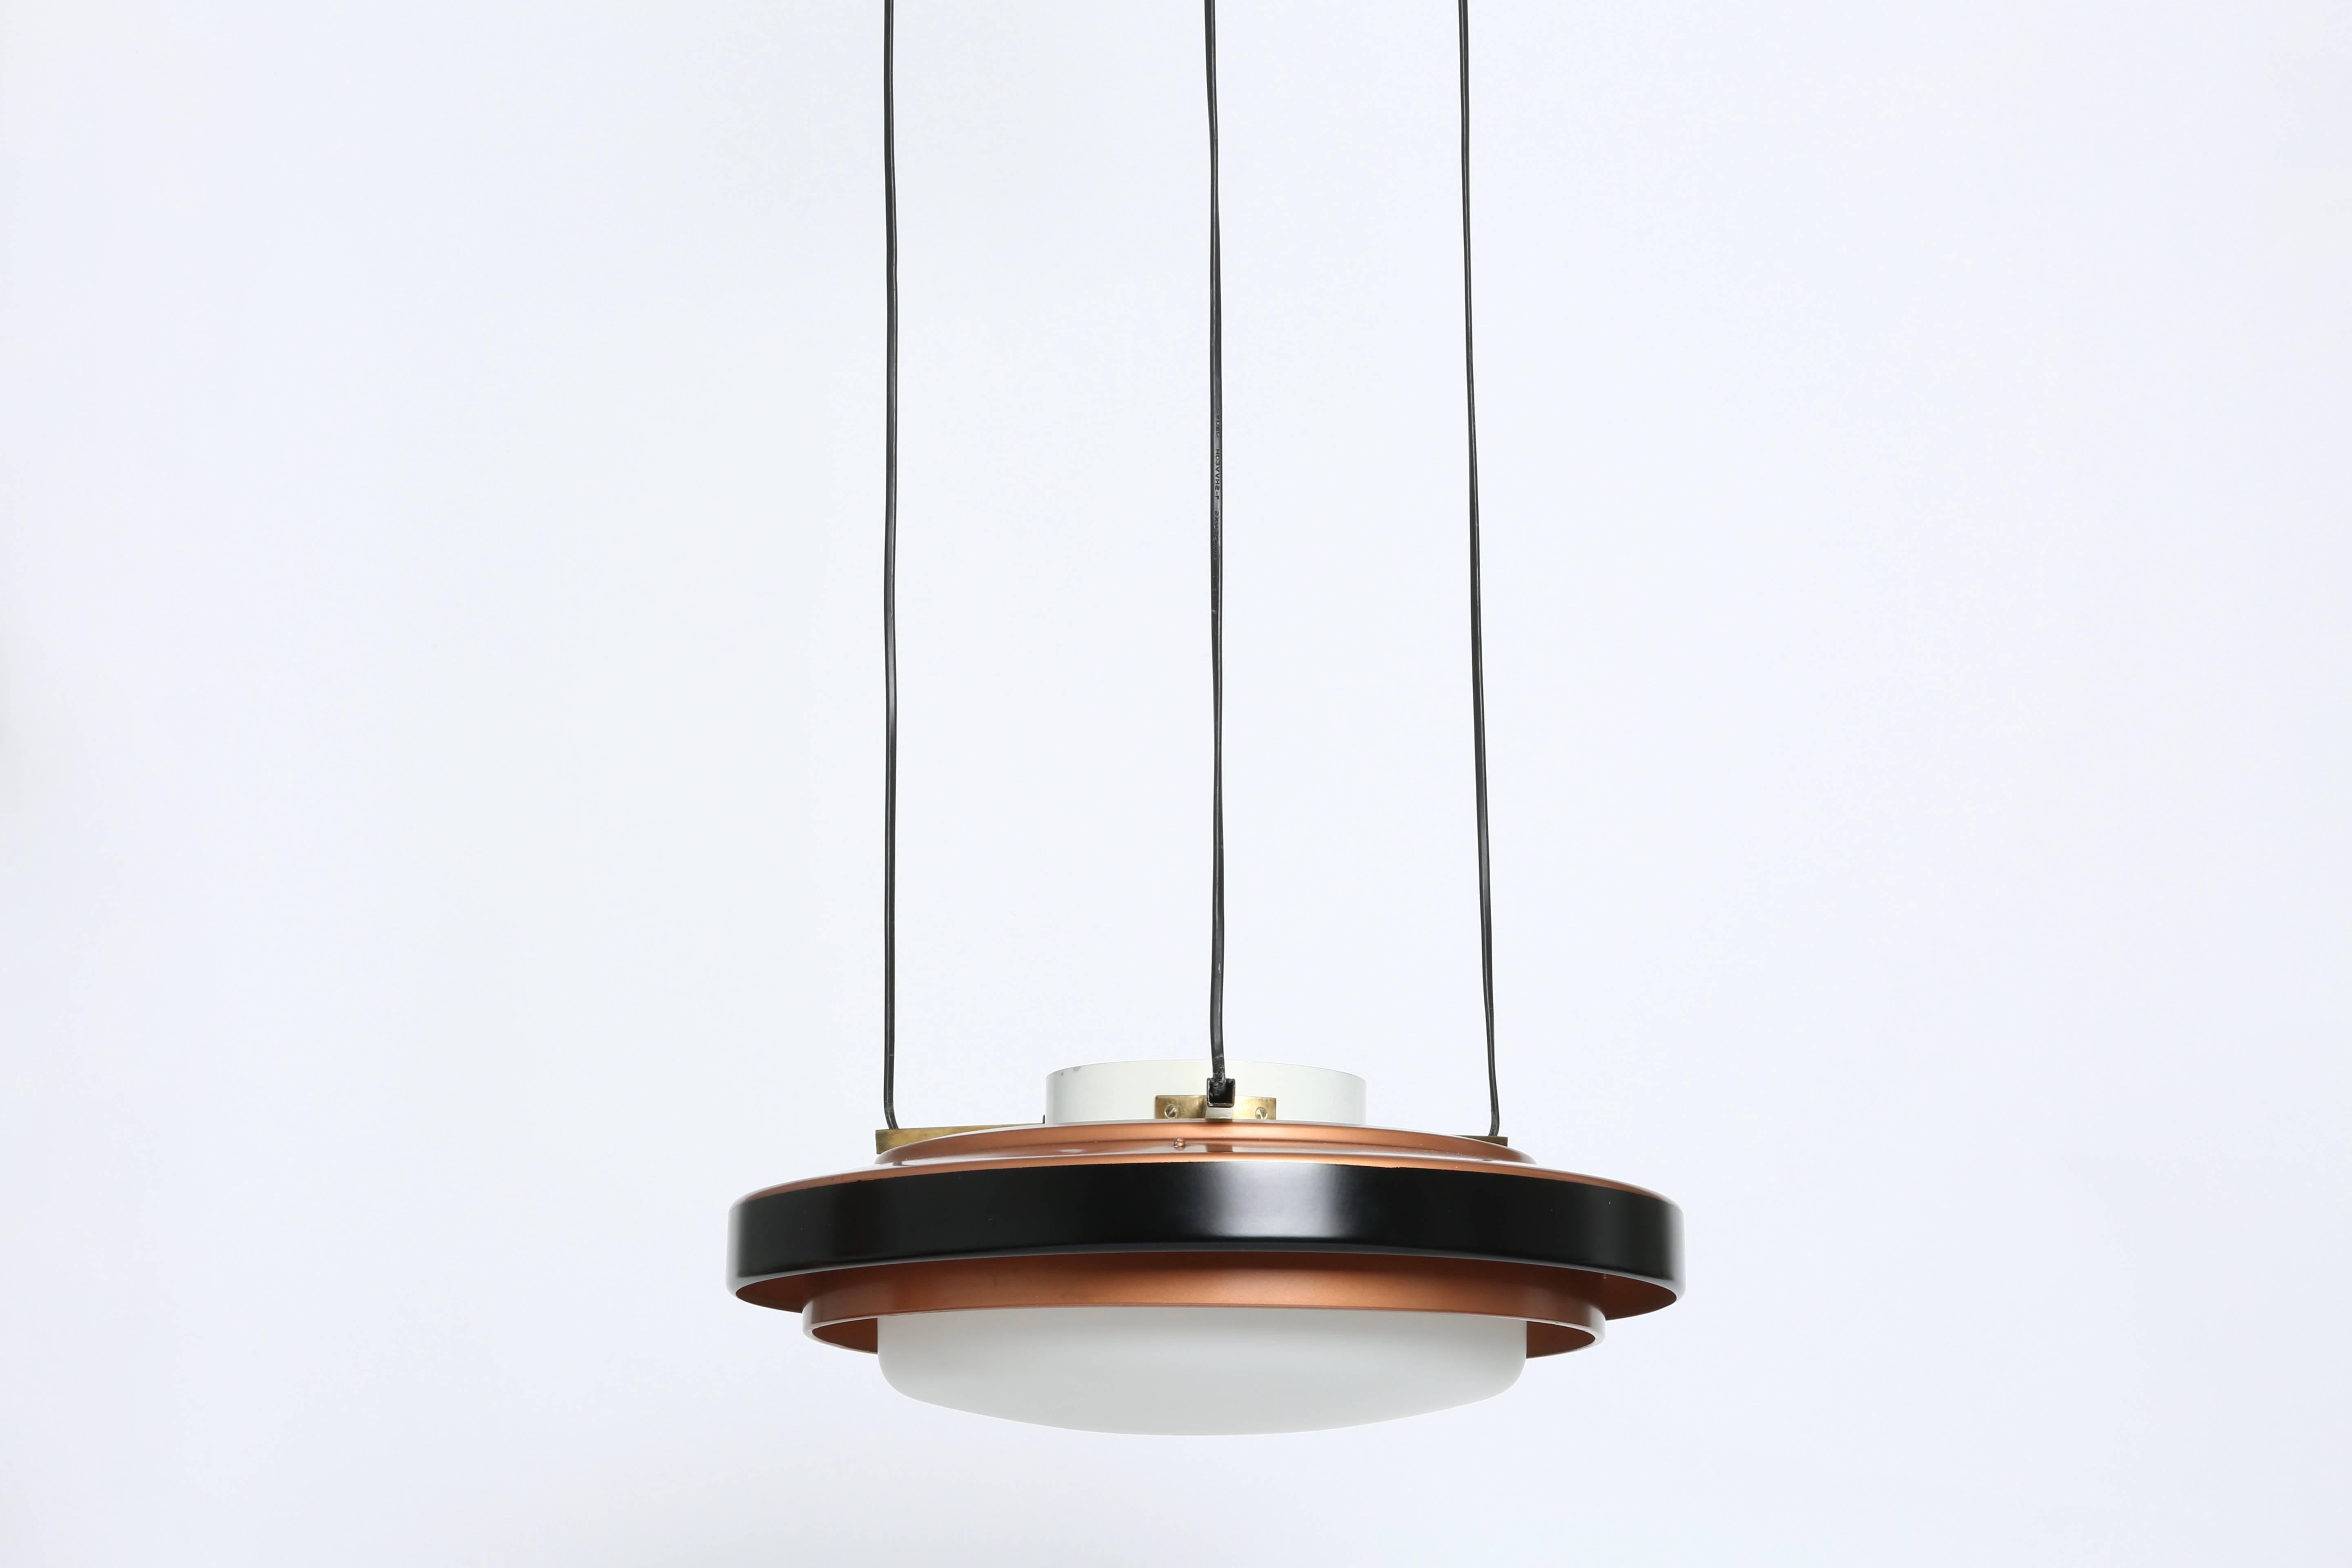 Stilnovo ceiling pendant.
Made with frosted glass and enameled metal.
Labeled Stilnovo.
Italy, 1950s.
 